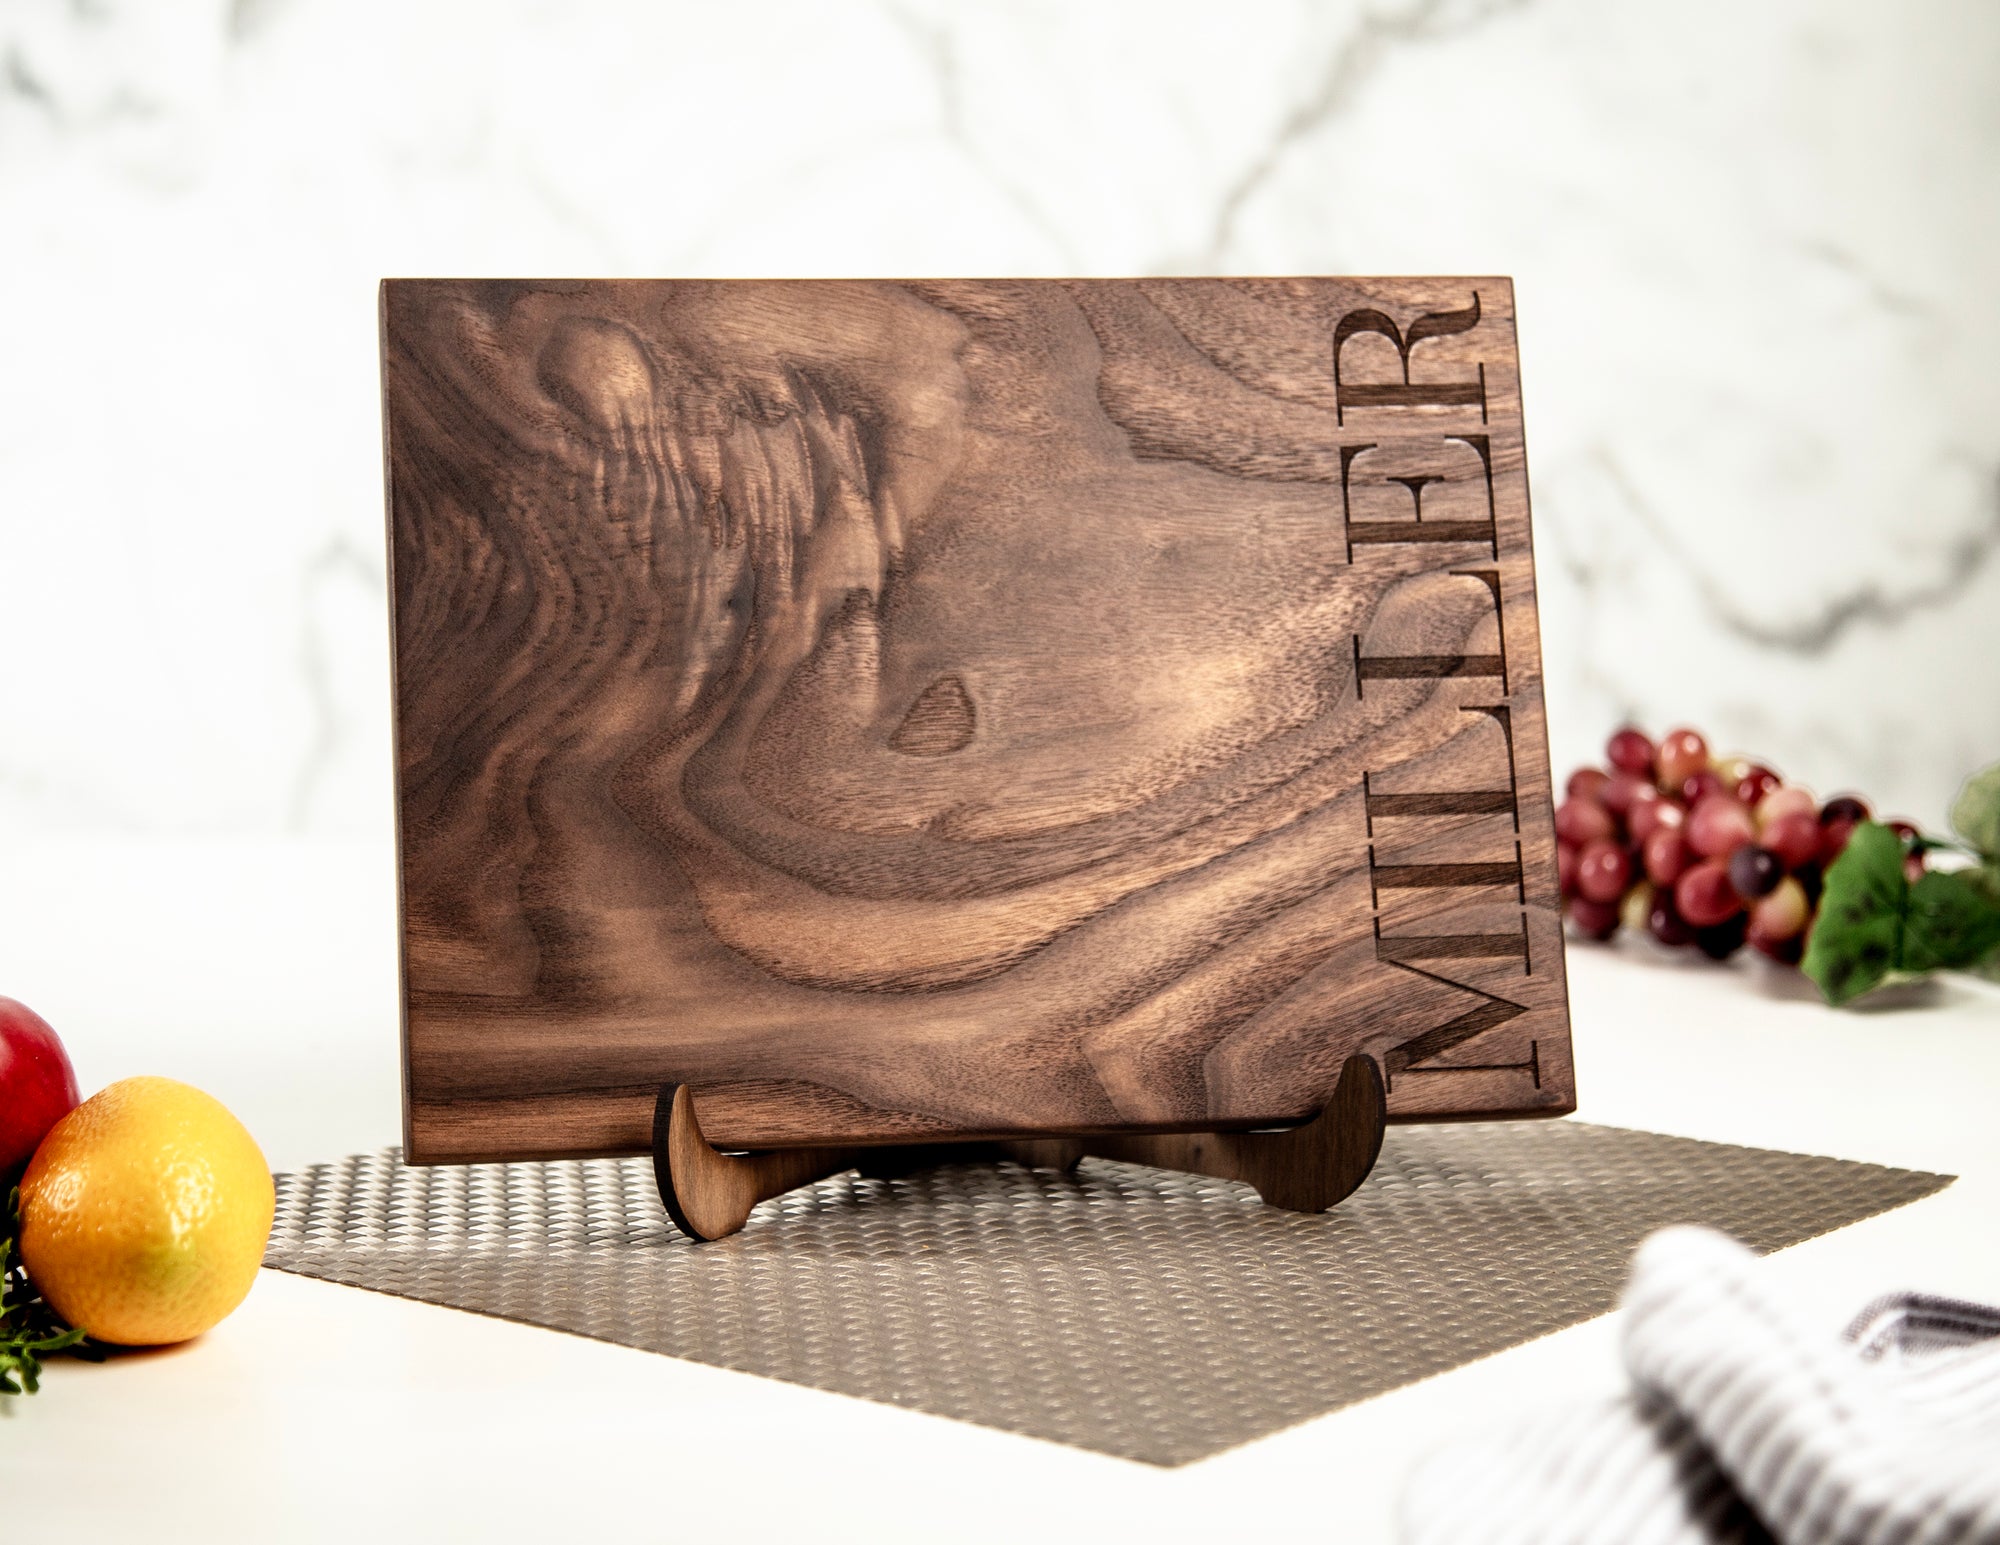 Just got my hands on the Gava Shops walnut cutting board with our bold last name engraved on it! It's not just functional, but also adds a touch of personalization to our kitchen. Love it! 🙌🏼🔪 #KitchenEssentials #PersonalizedTouch